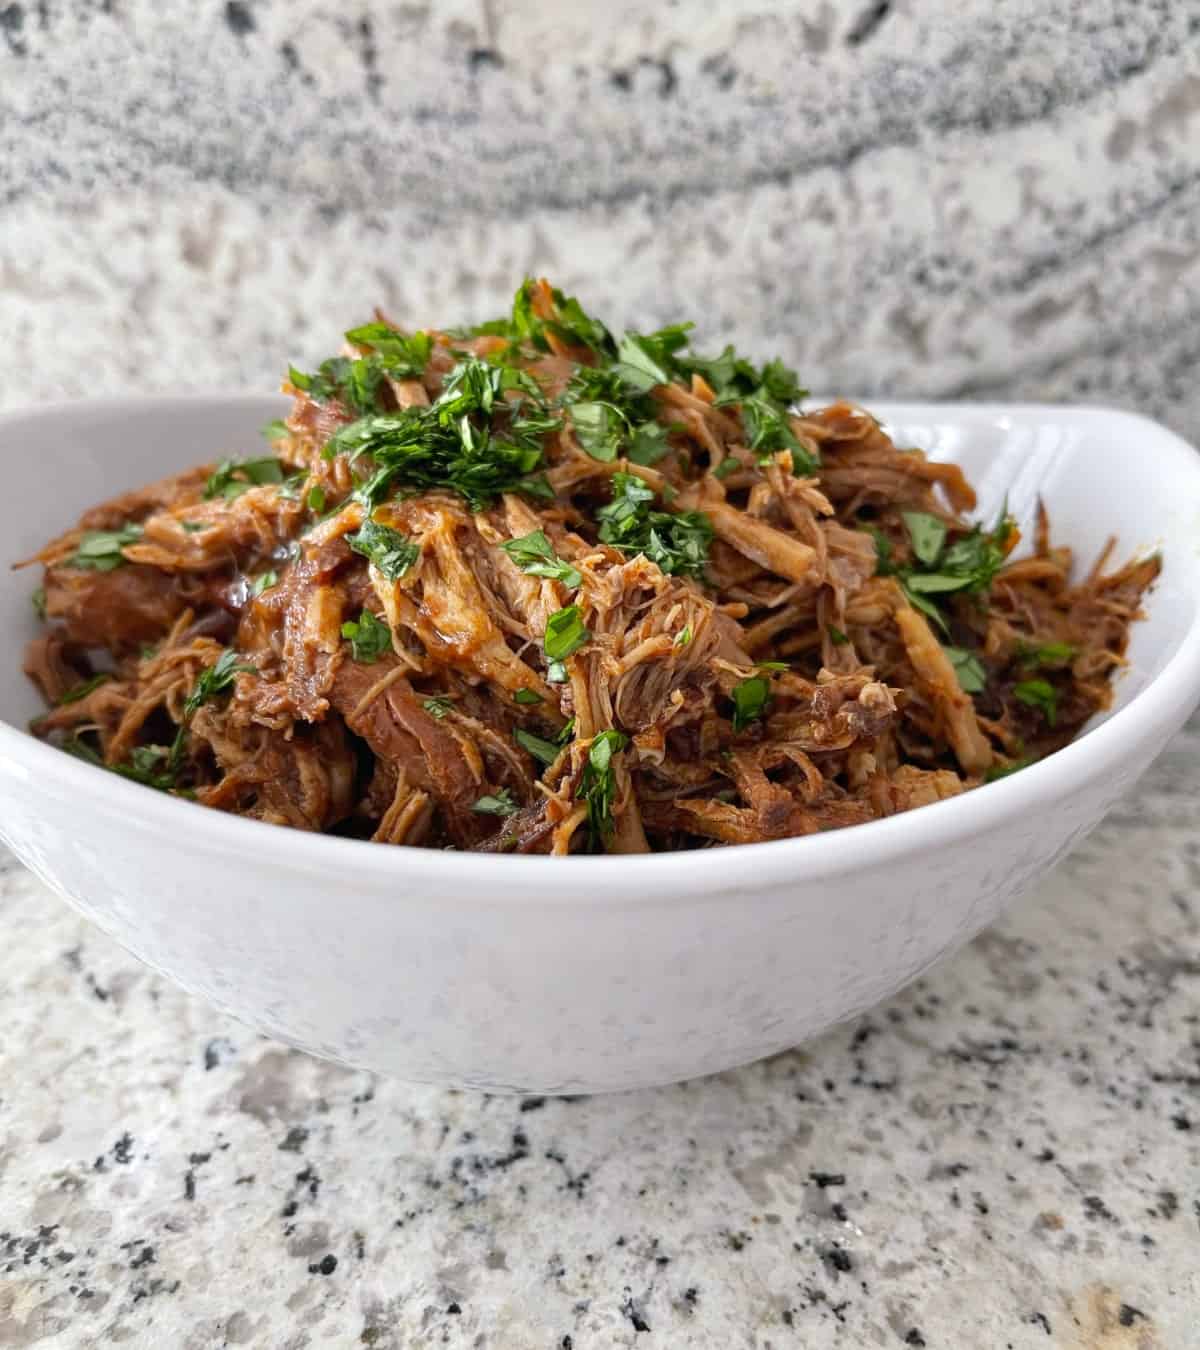 Cherry Chipotle Pulled Pork garnished with fresh chopped cilantro in white serving bowl.